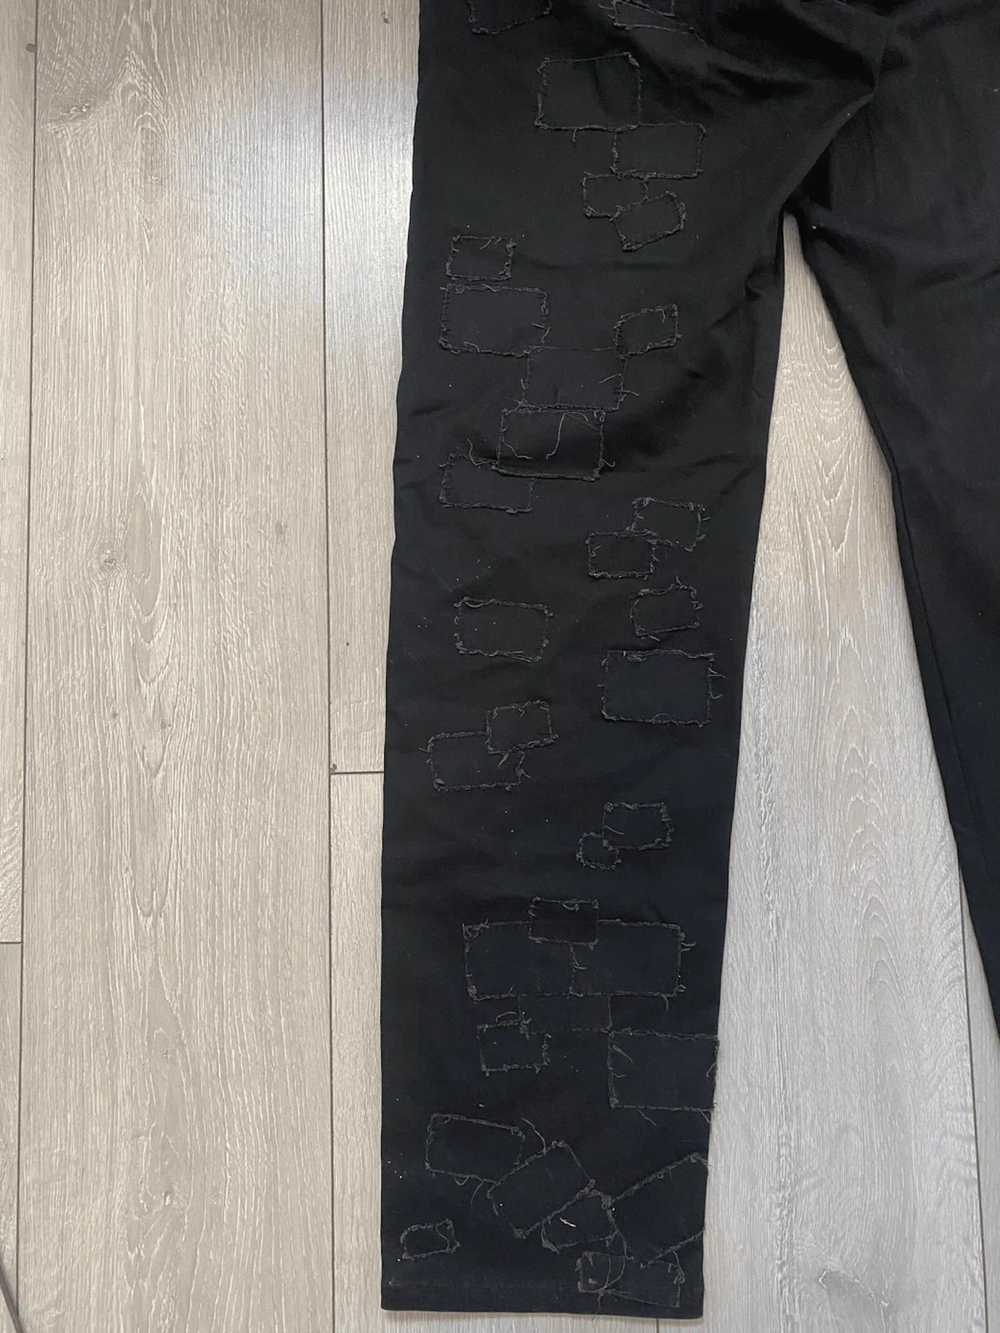 Undercover Undercover SS03 Scab Pants Patchwork - image 3